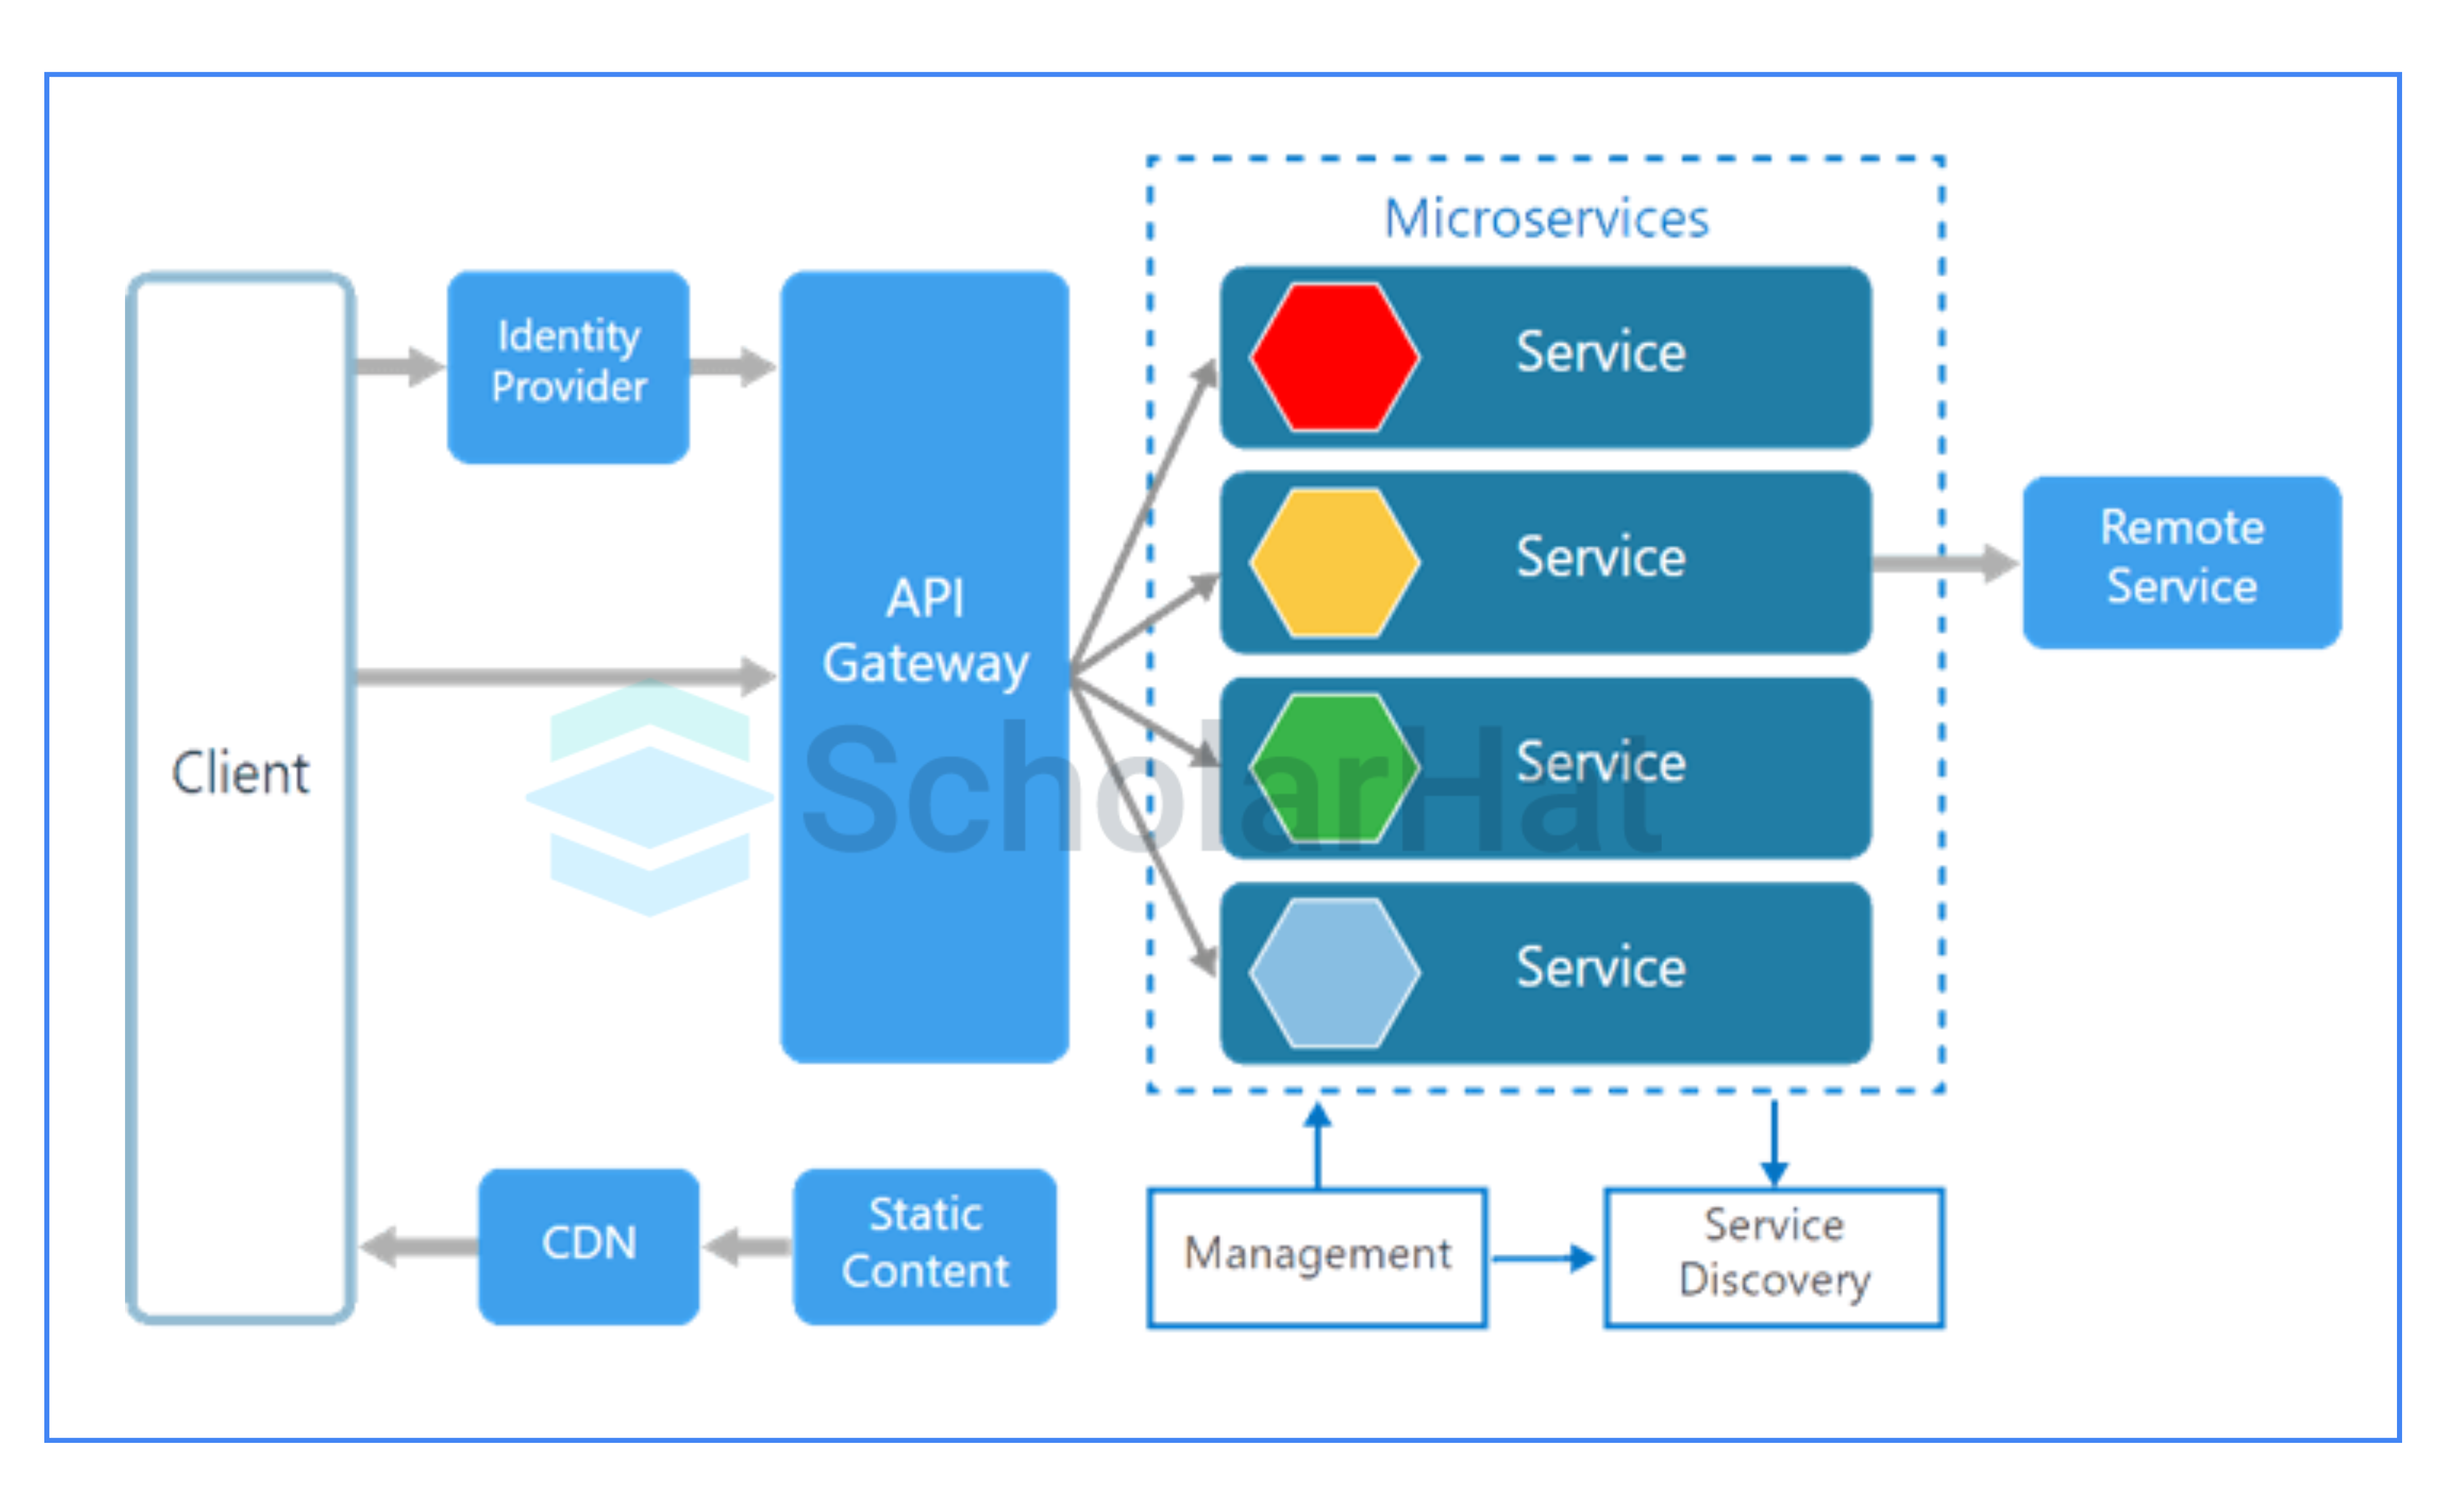 Architecture of Microservices